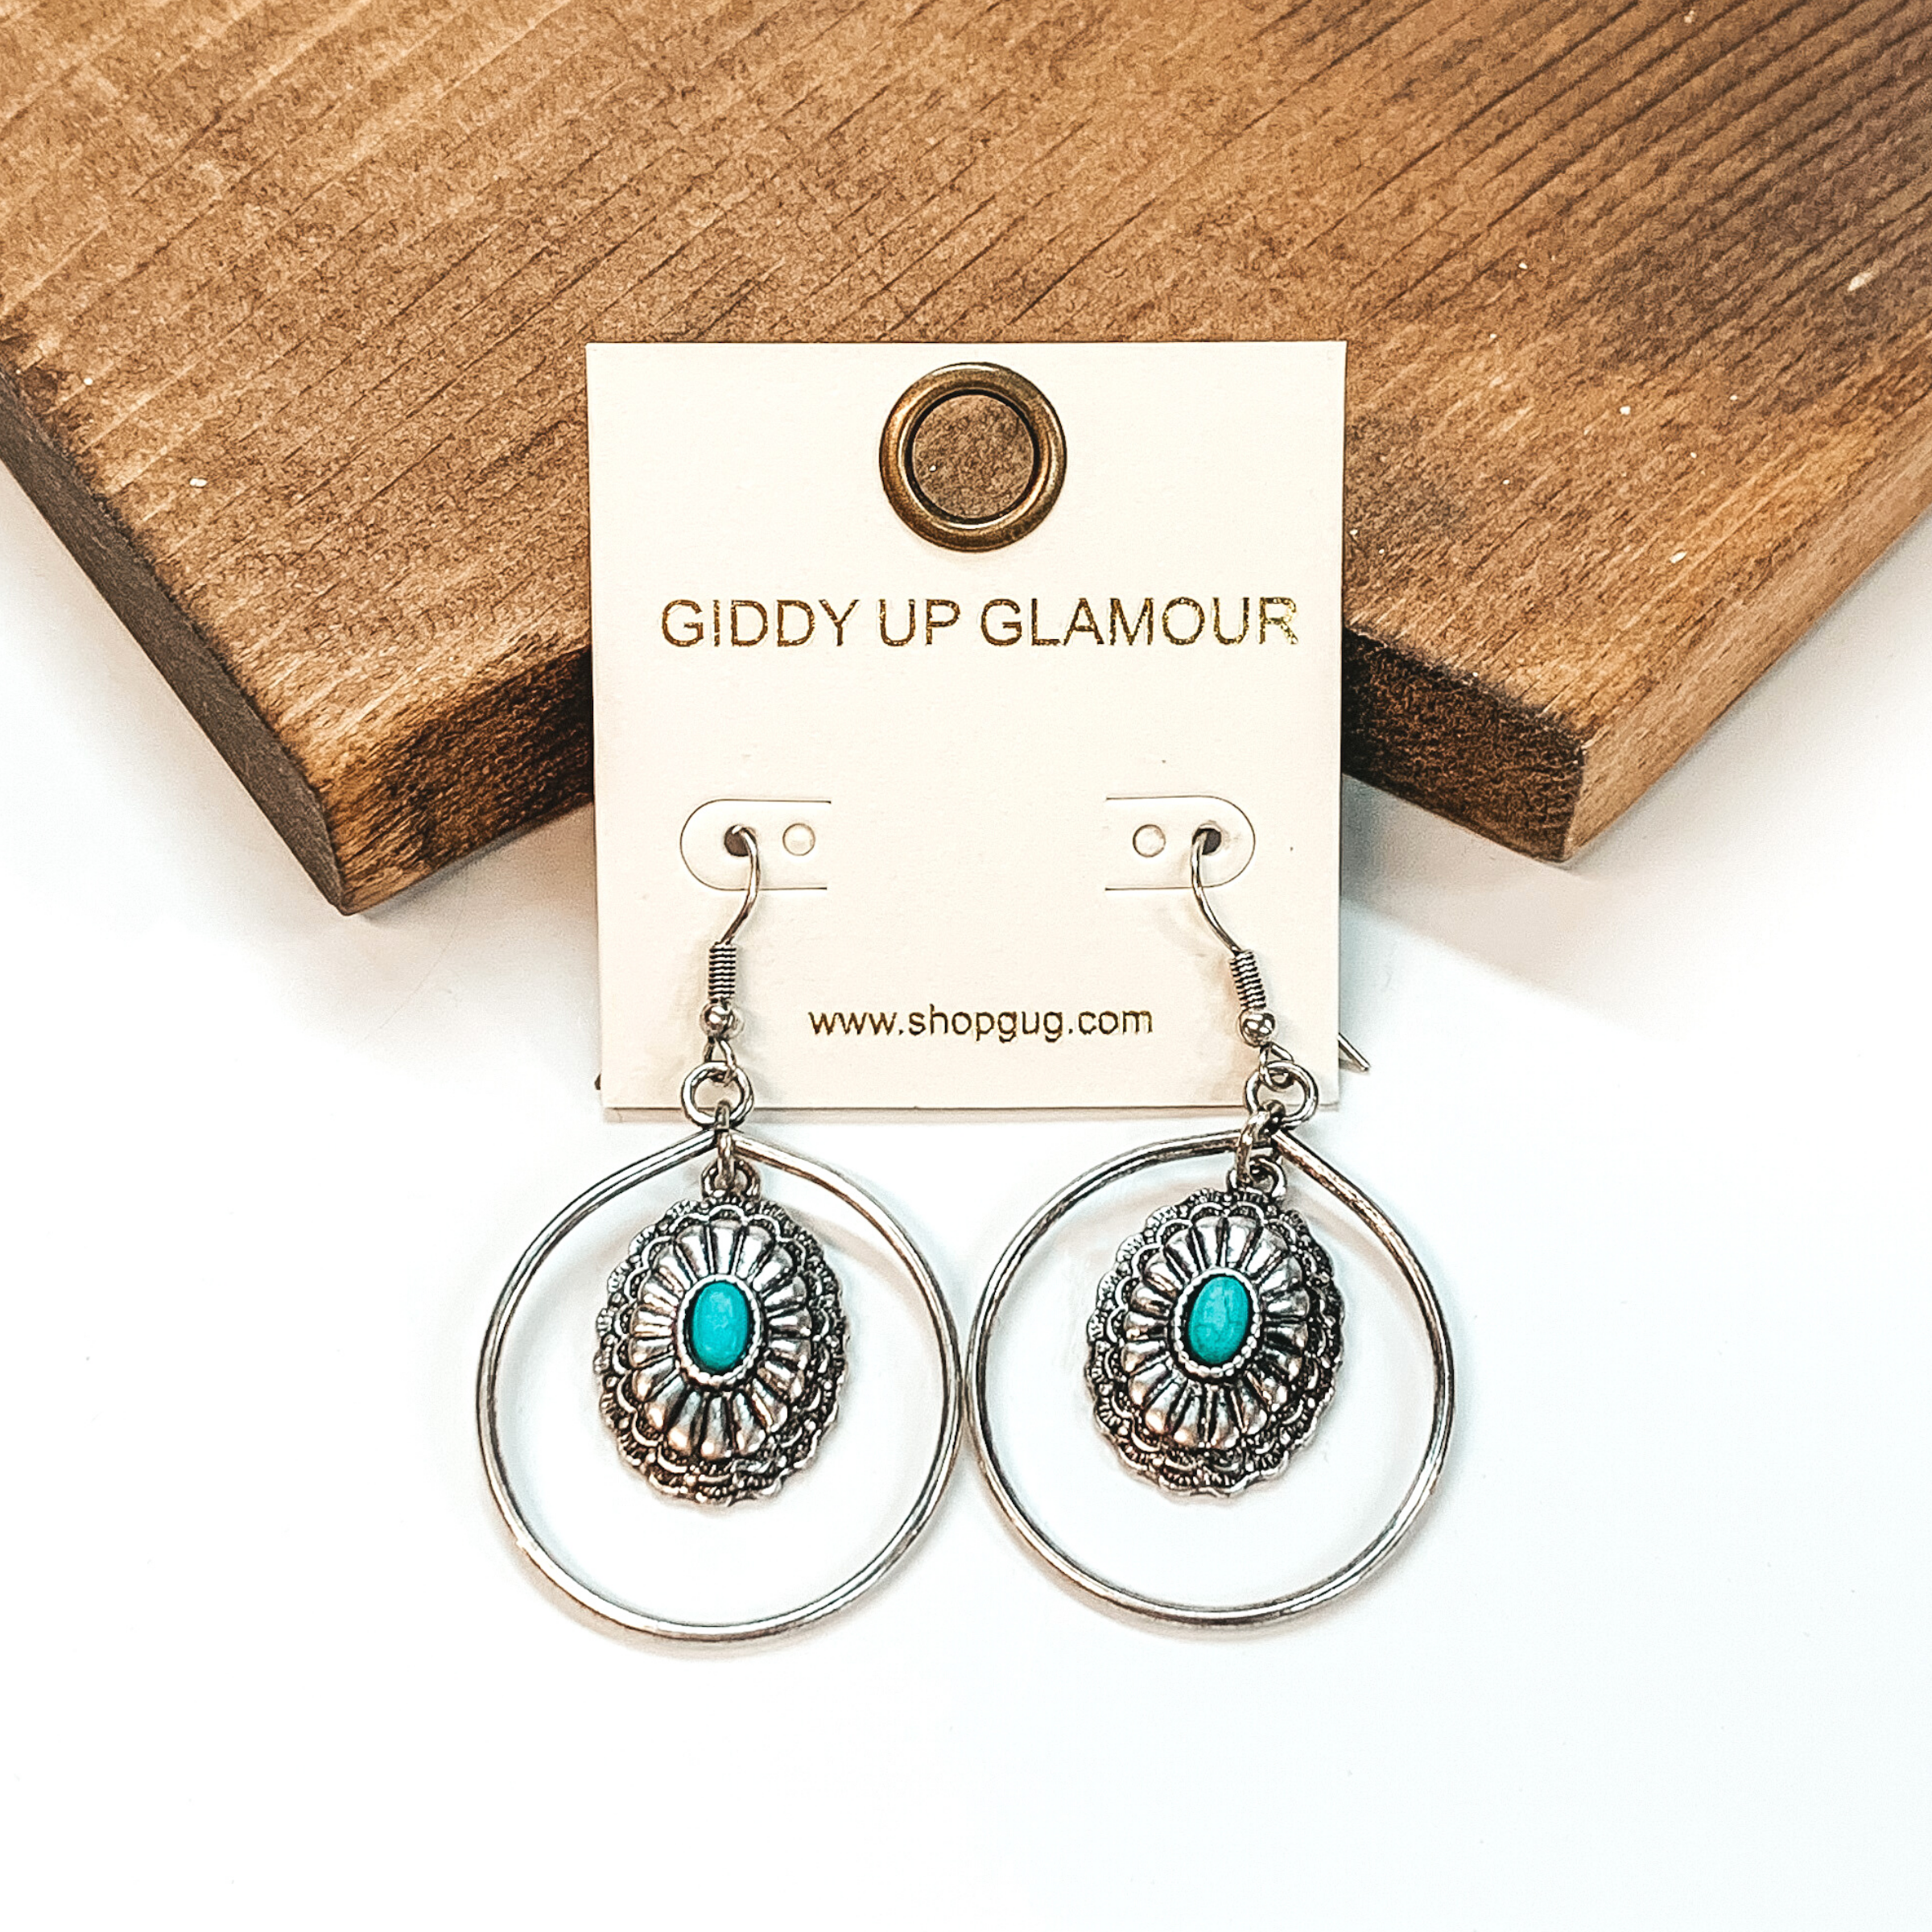  Silver fish hook earrings with a circle drop pendant. Hanging in the middle of the circle is a concho pendant that has a tiny turquoise center stone. These earrings are pictured on a white background in front of a brown block.